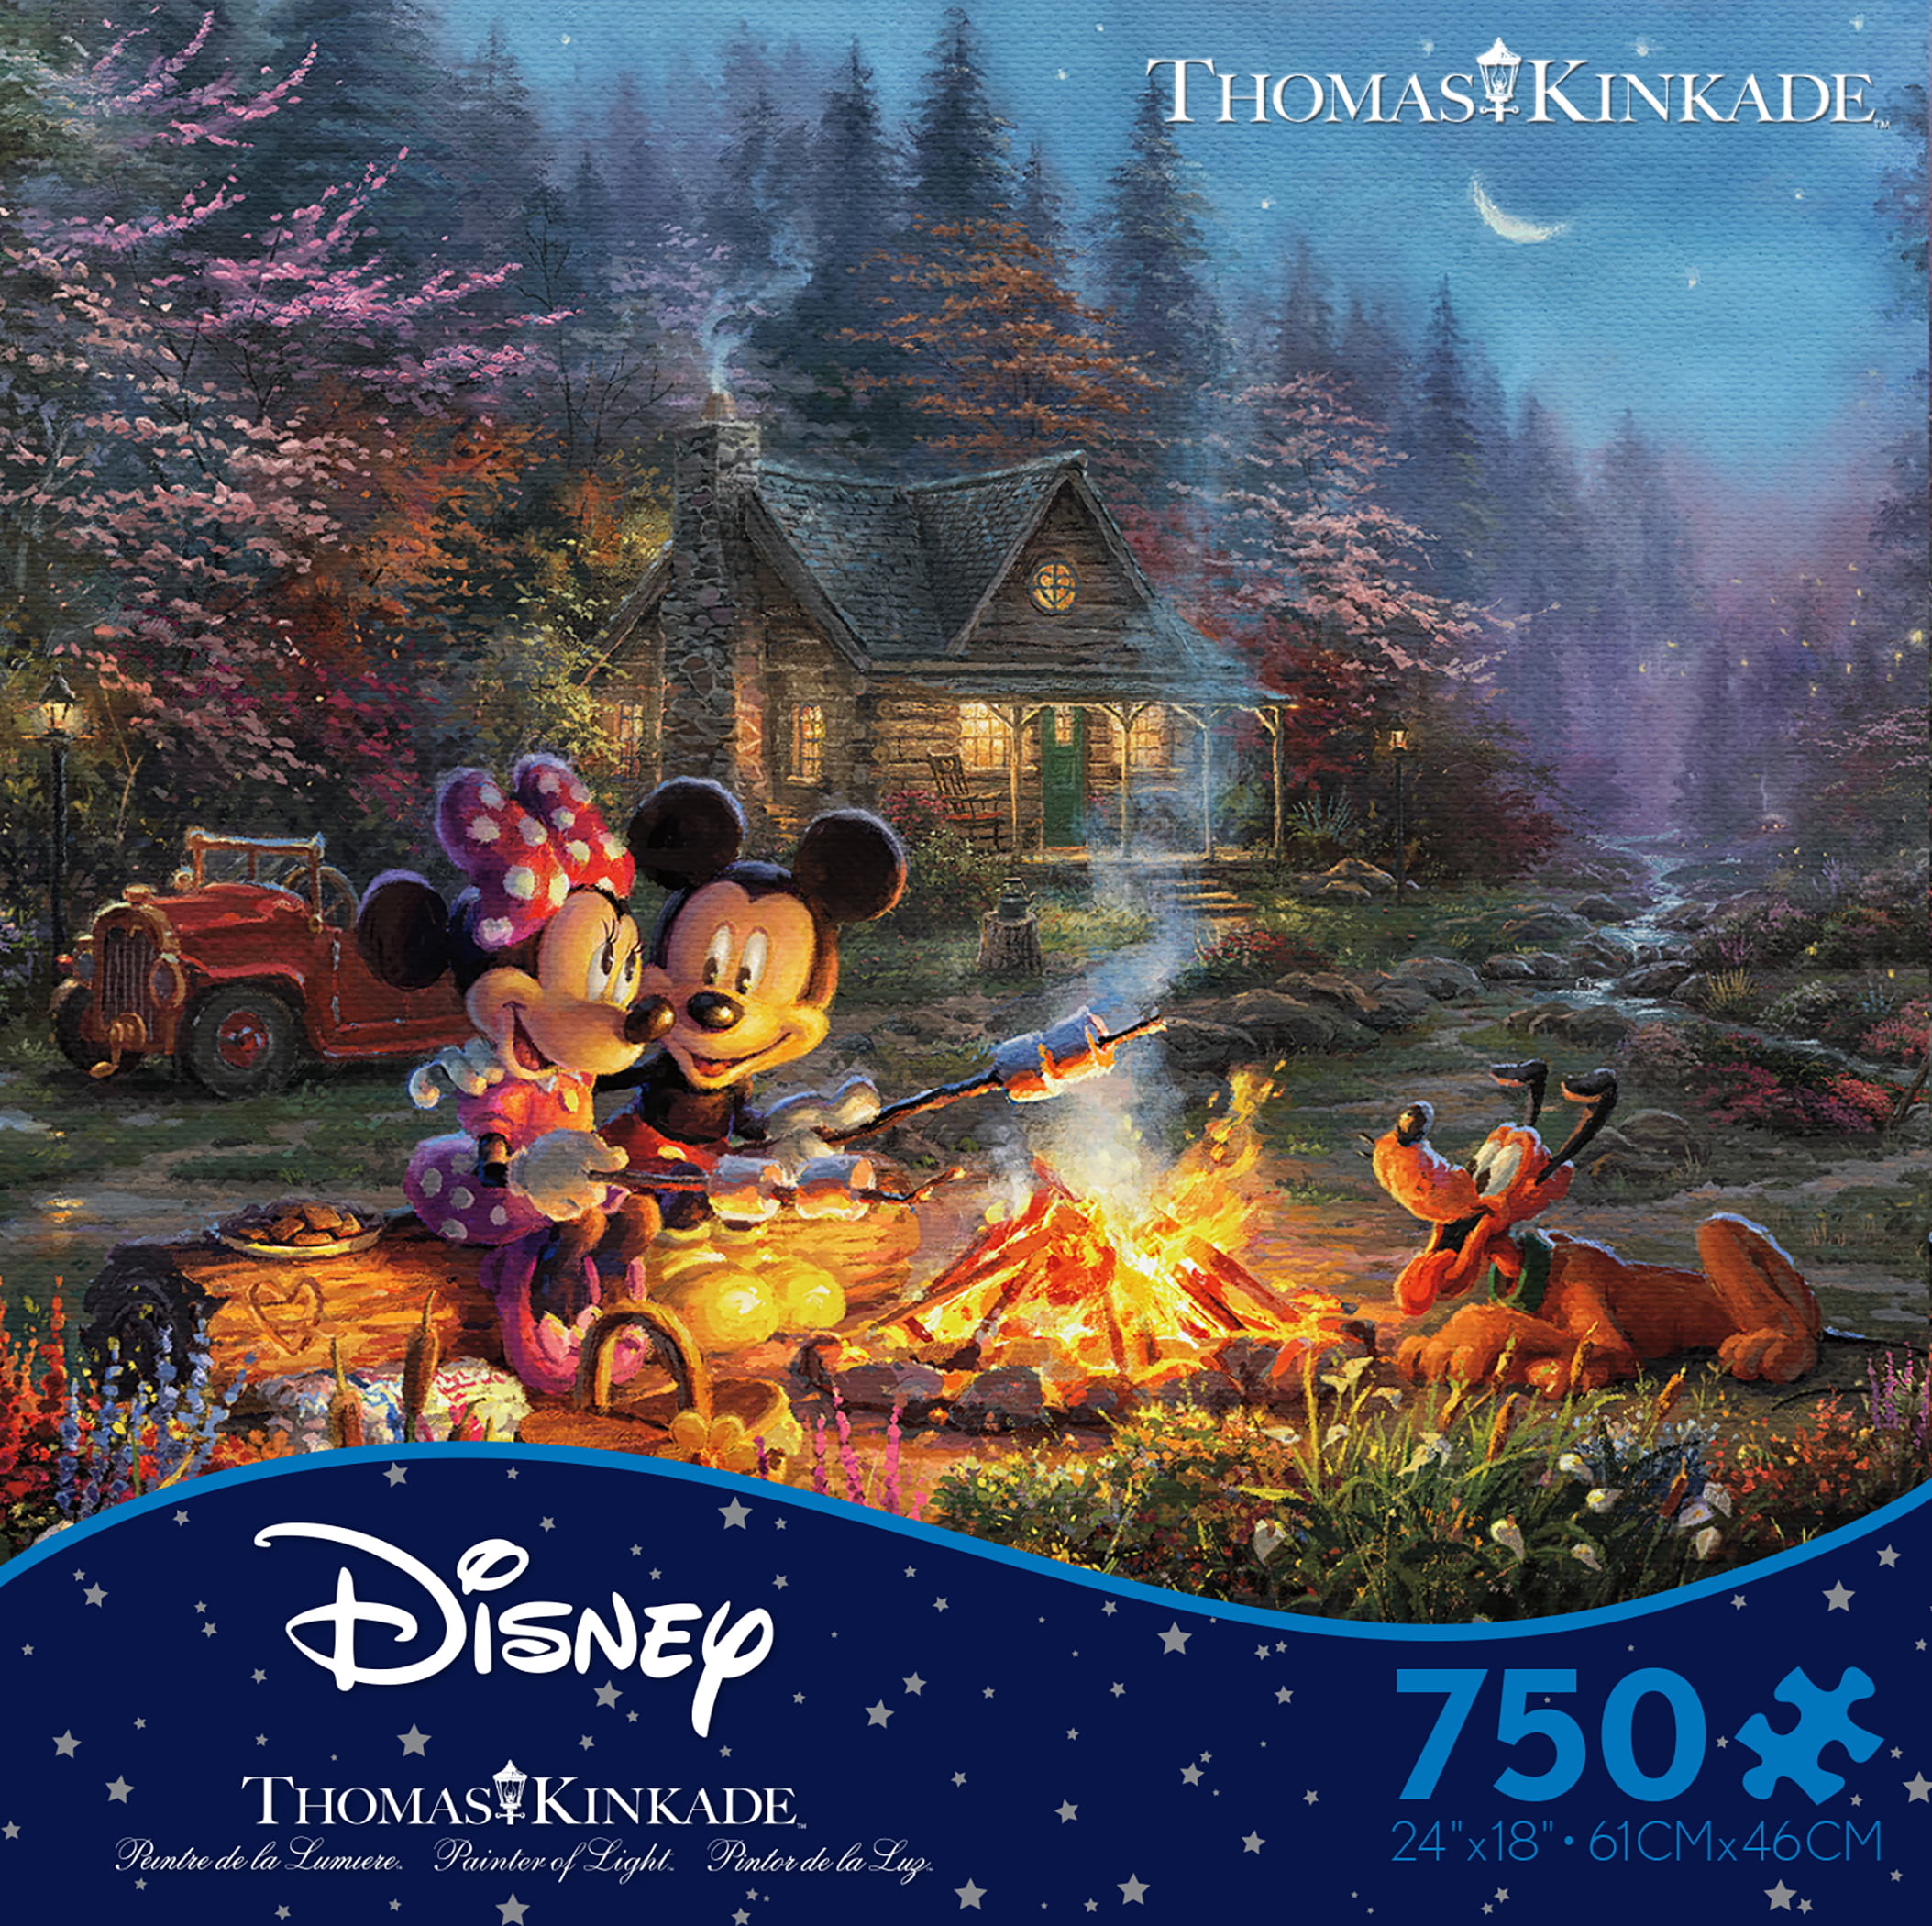 Thomas Kinkade Disney Ceaco Mickey and Minnie in Paris 750 PC Jigsaw Puzzle for sale online 